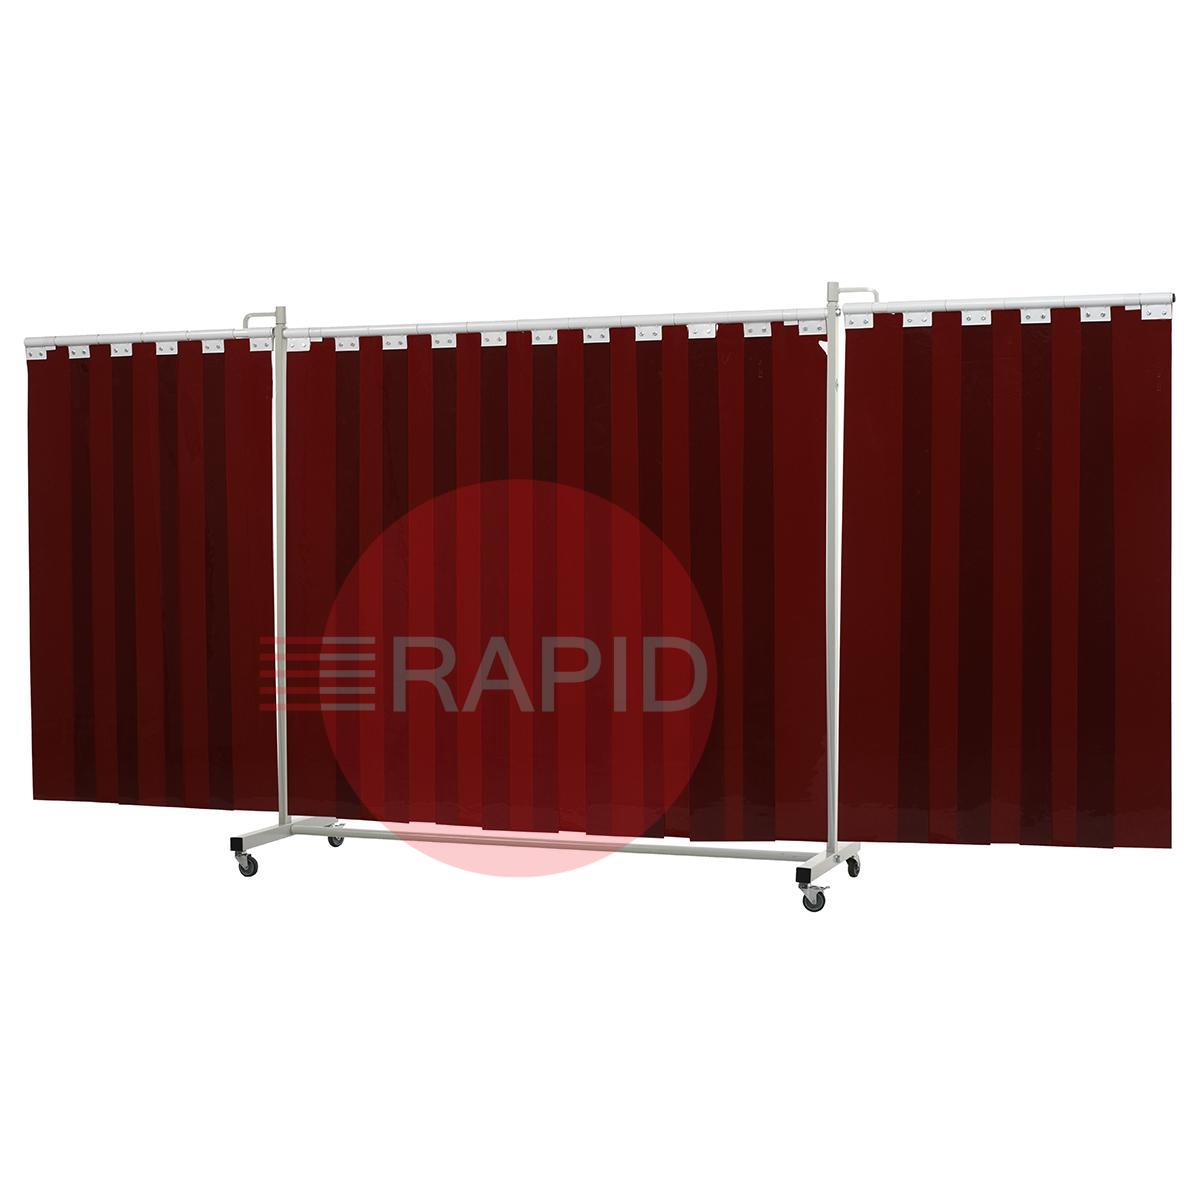 36.31.77  CEPRO Robusto XL Triptych Welding Screen with Bronze-CE Strips - 4.4m Wide x 2.1m High, Approved EN 25980